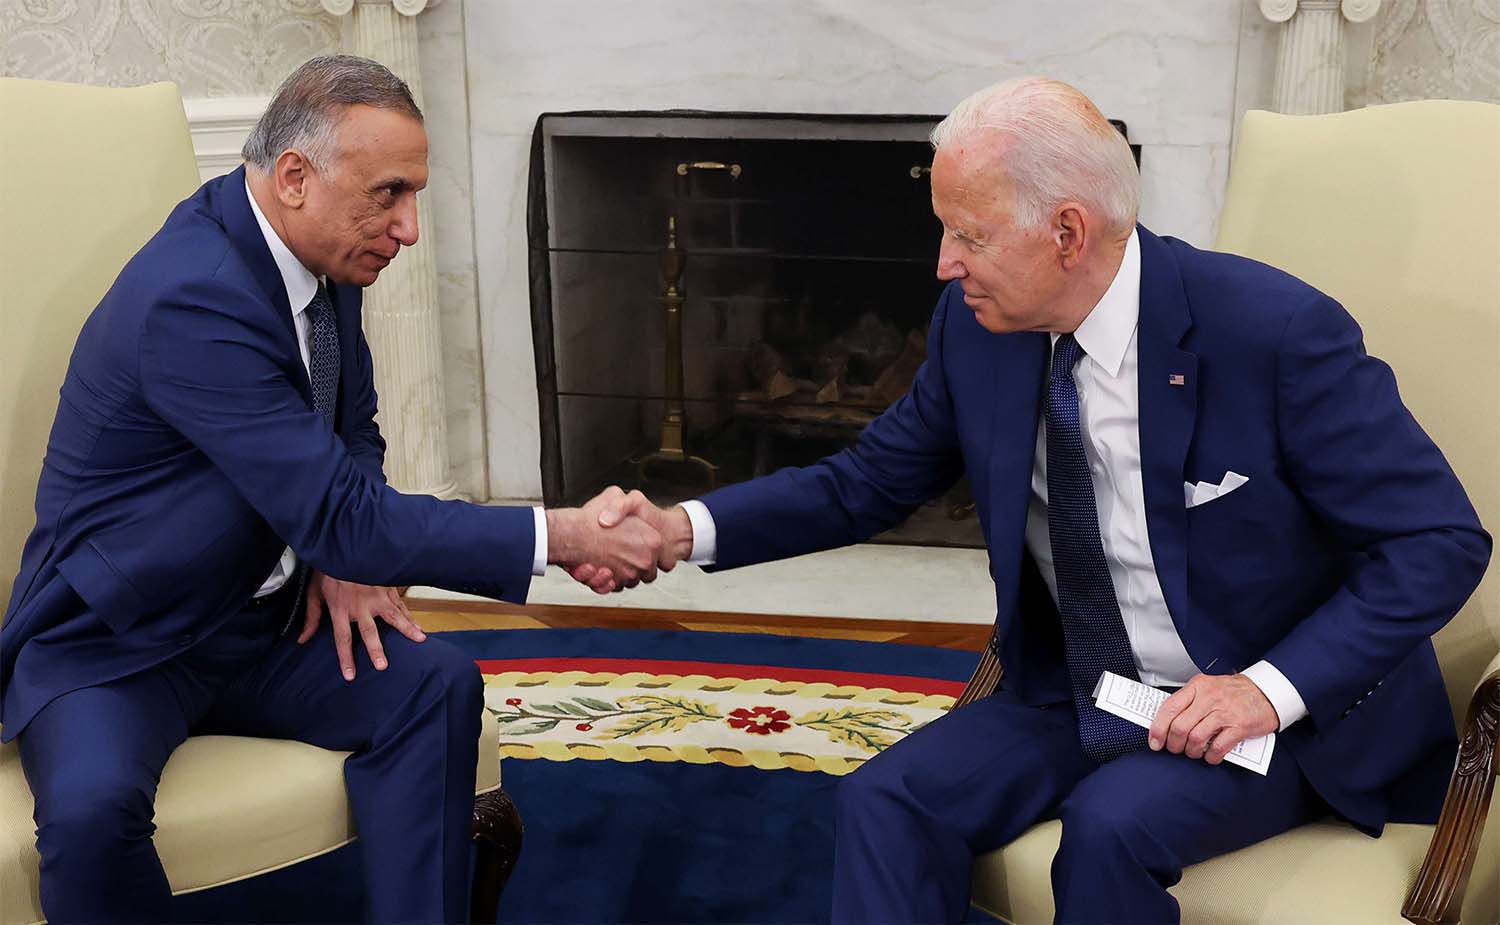 Biden said the US military will continue to assist Iraq in its fight against the Islamic State group